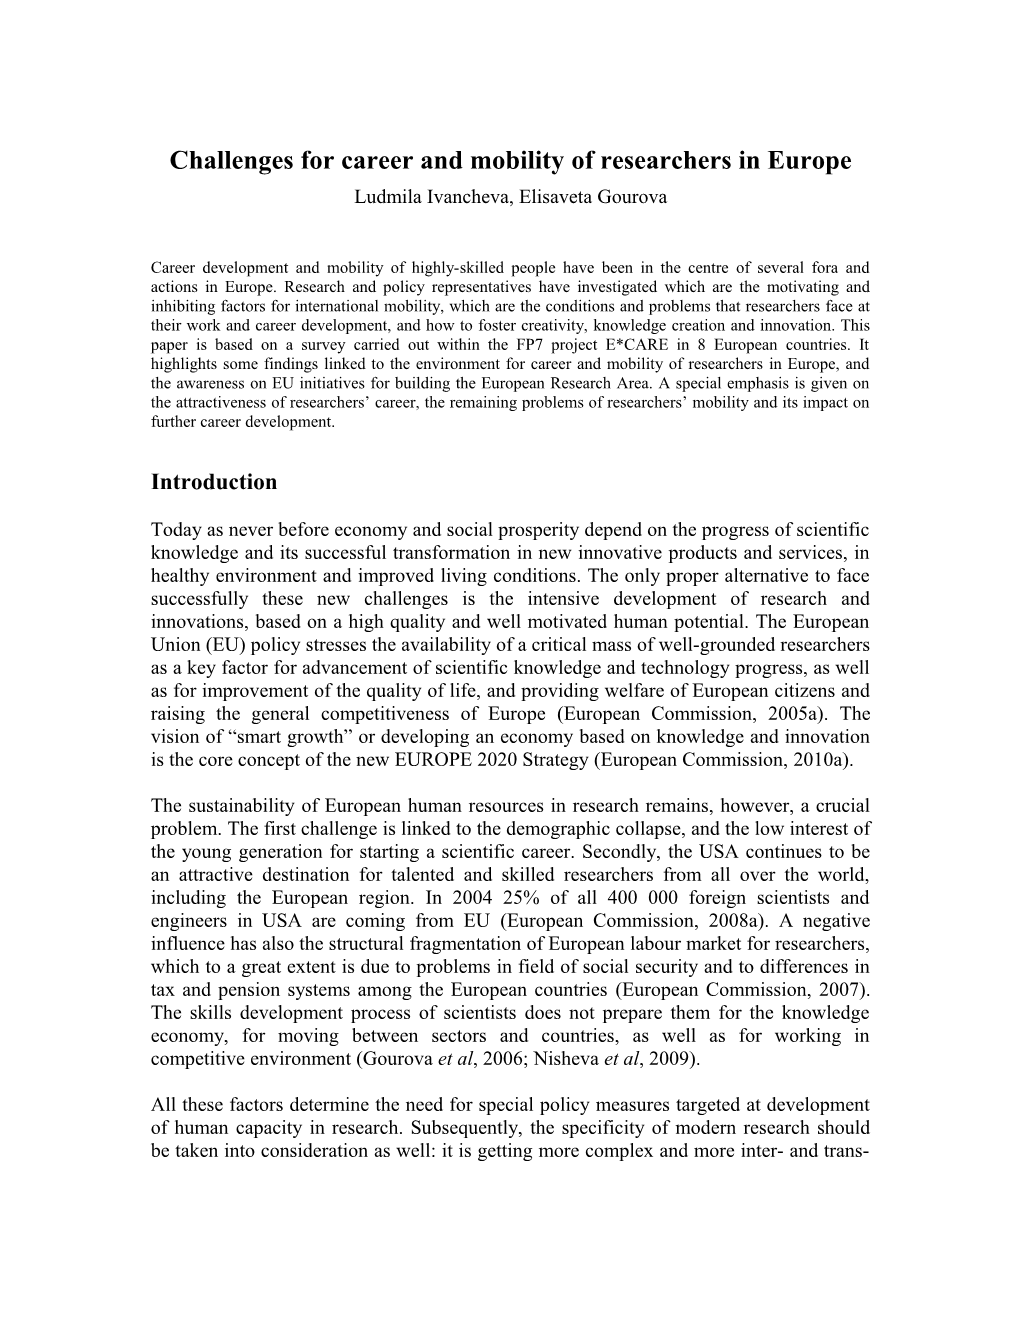 Challenges for Career and Mobility of Researchers in Europe